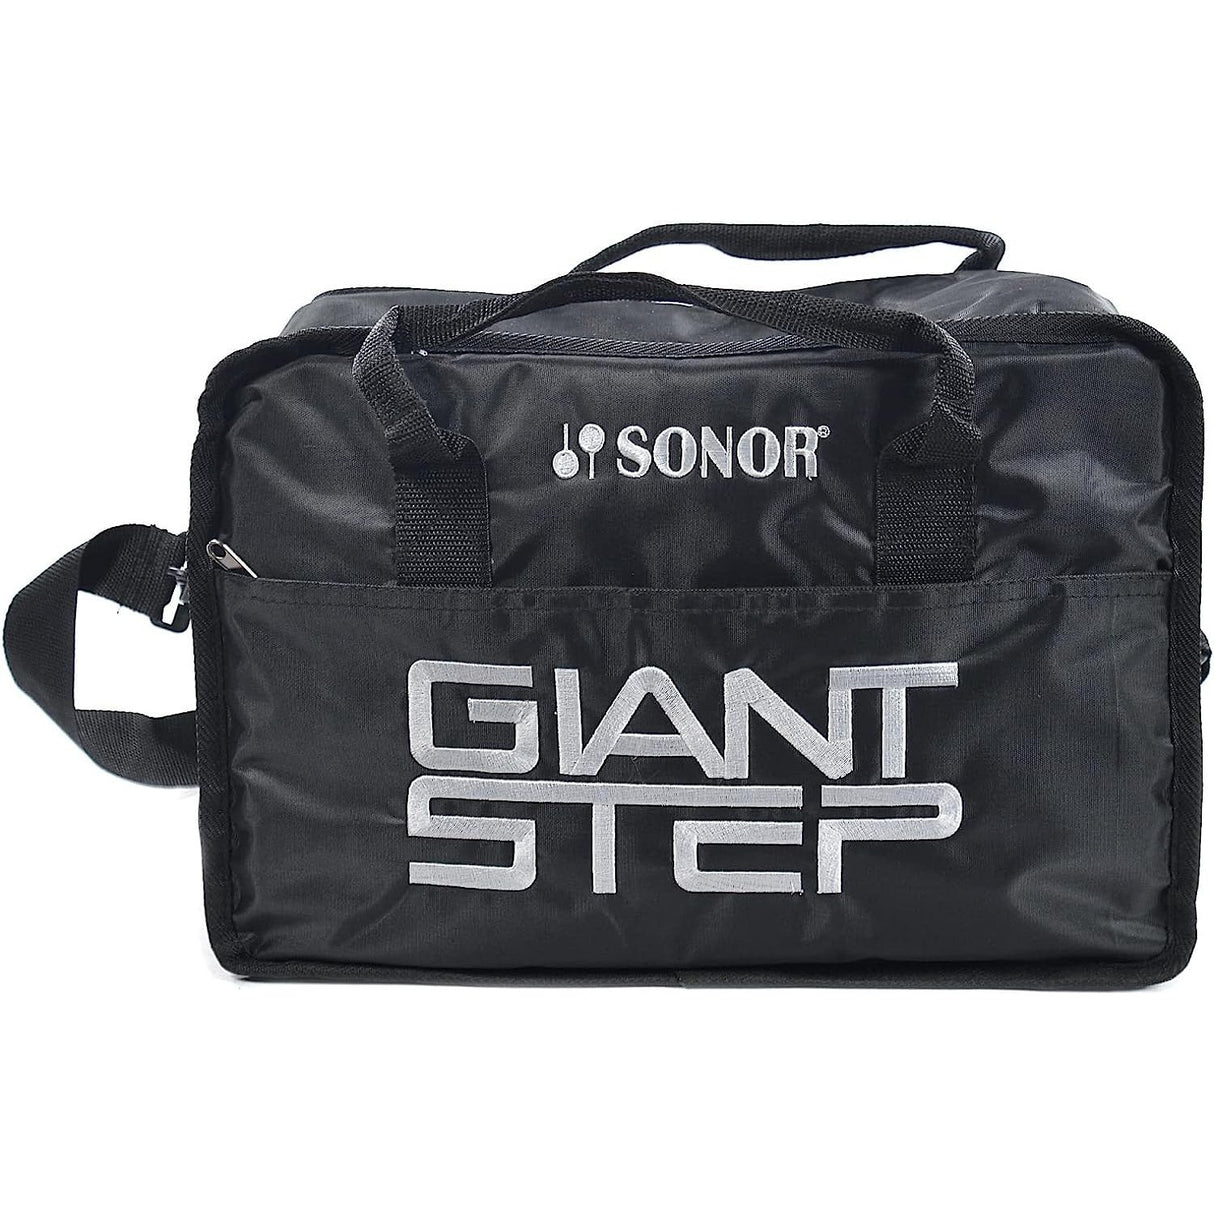 Sonor Giant Step Single Pedal w/Docking Station